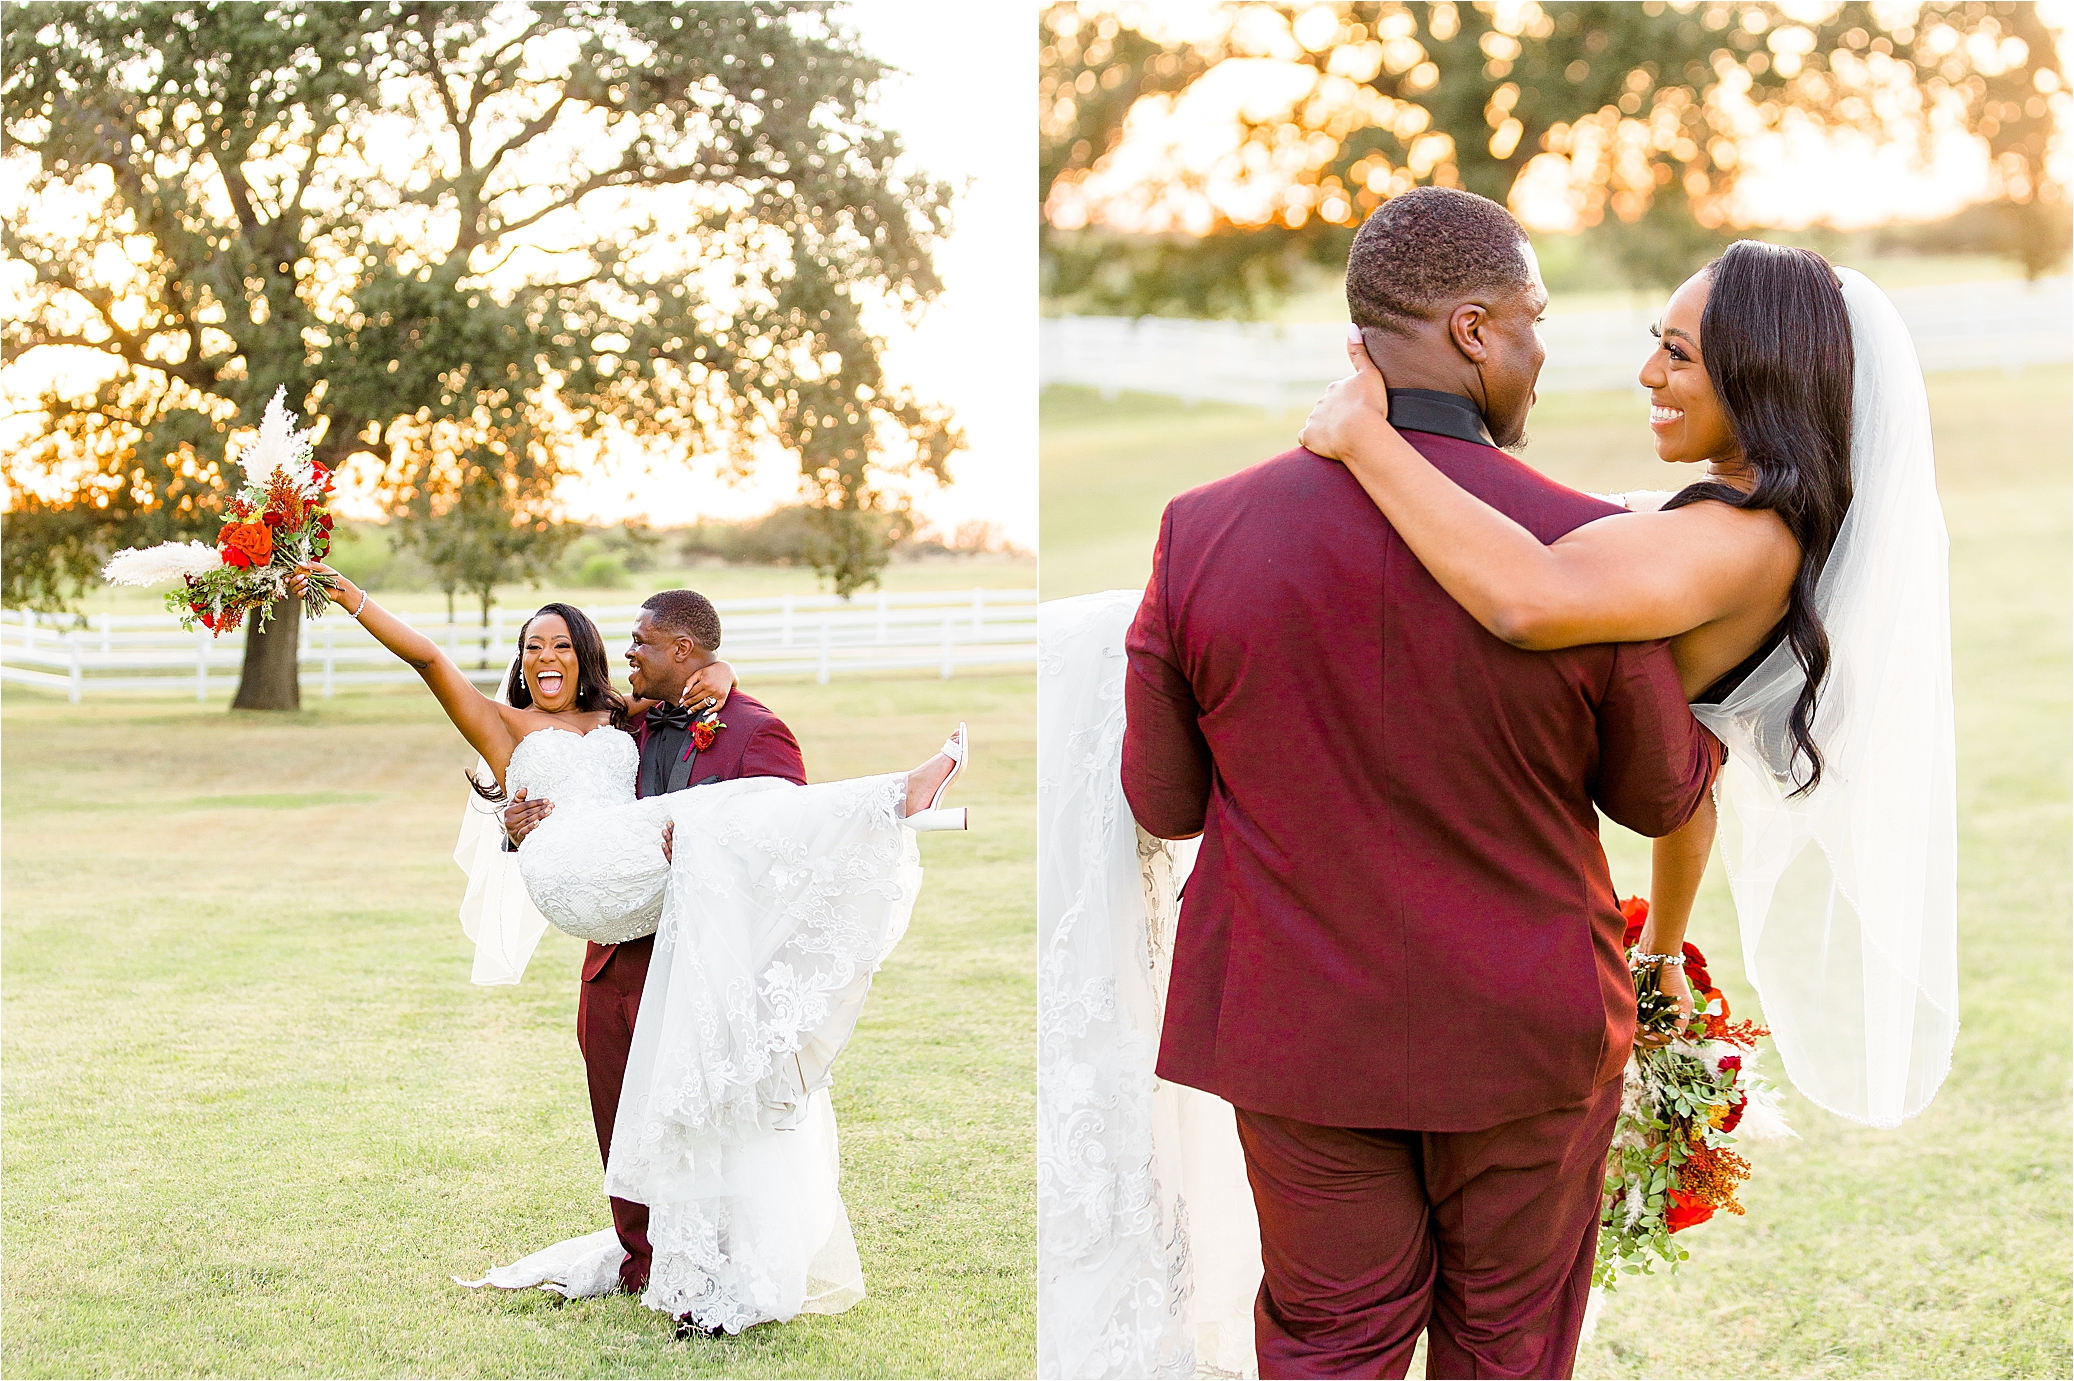 A groom lifts his bride and carries her off at The Milestone by Boerne Wedding Photographer Jillian Hogan 